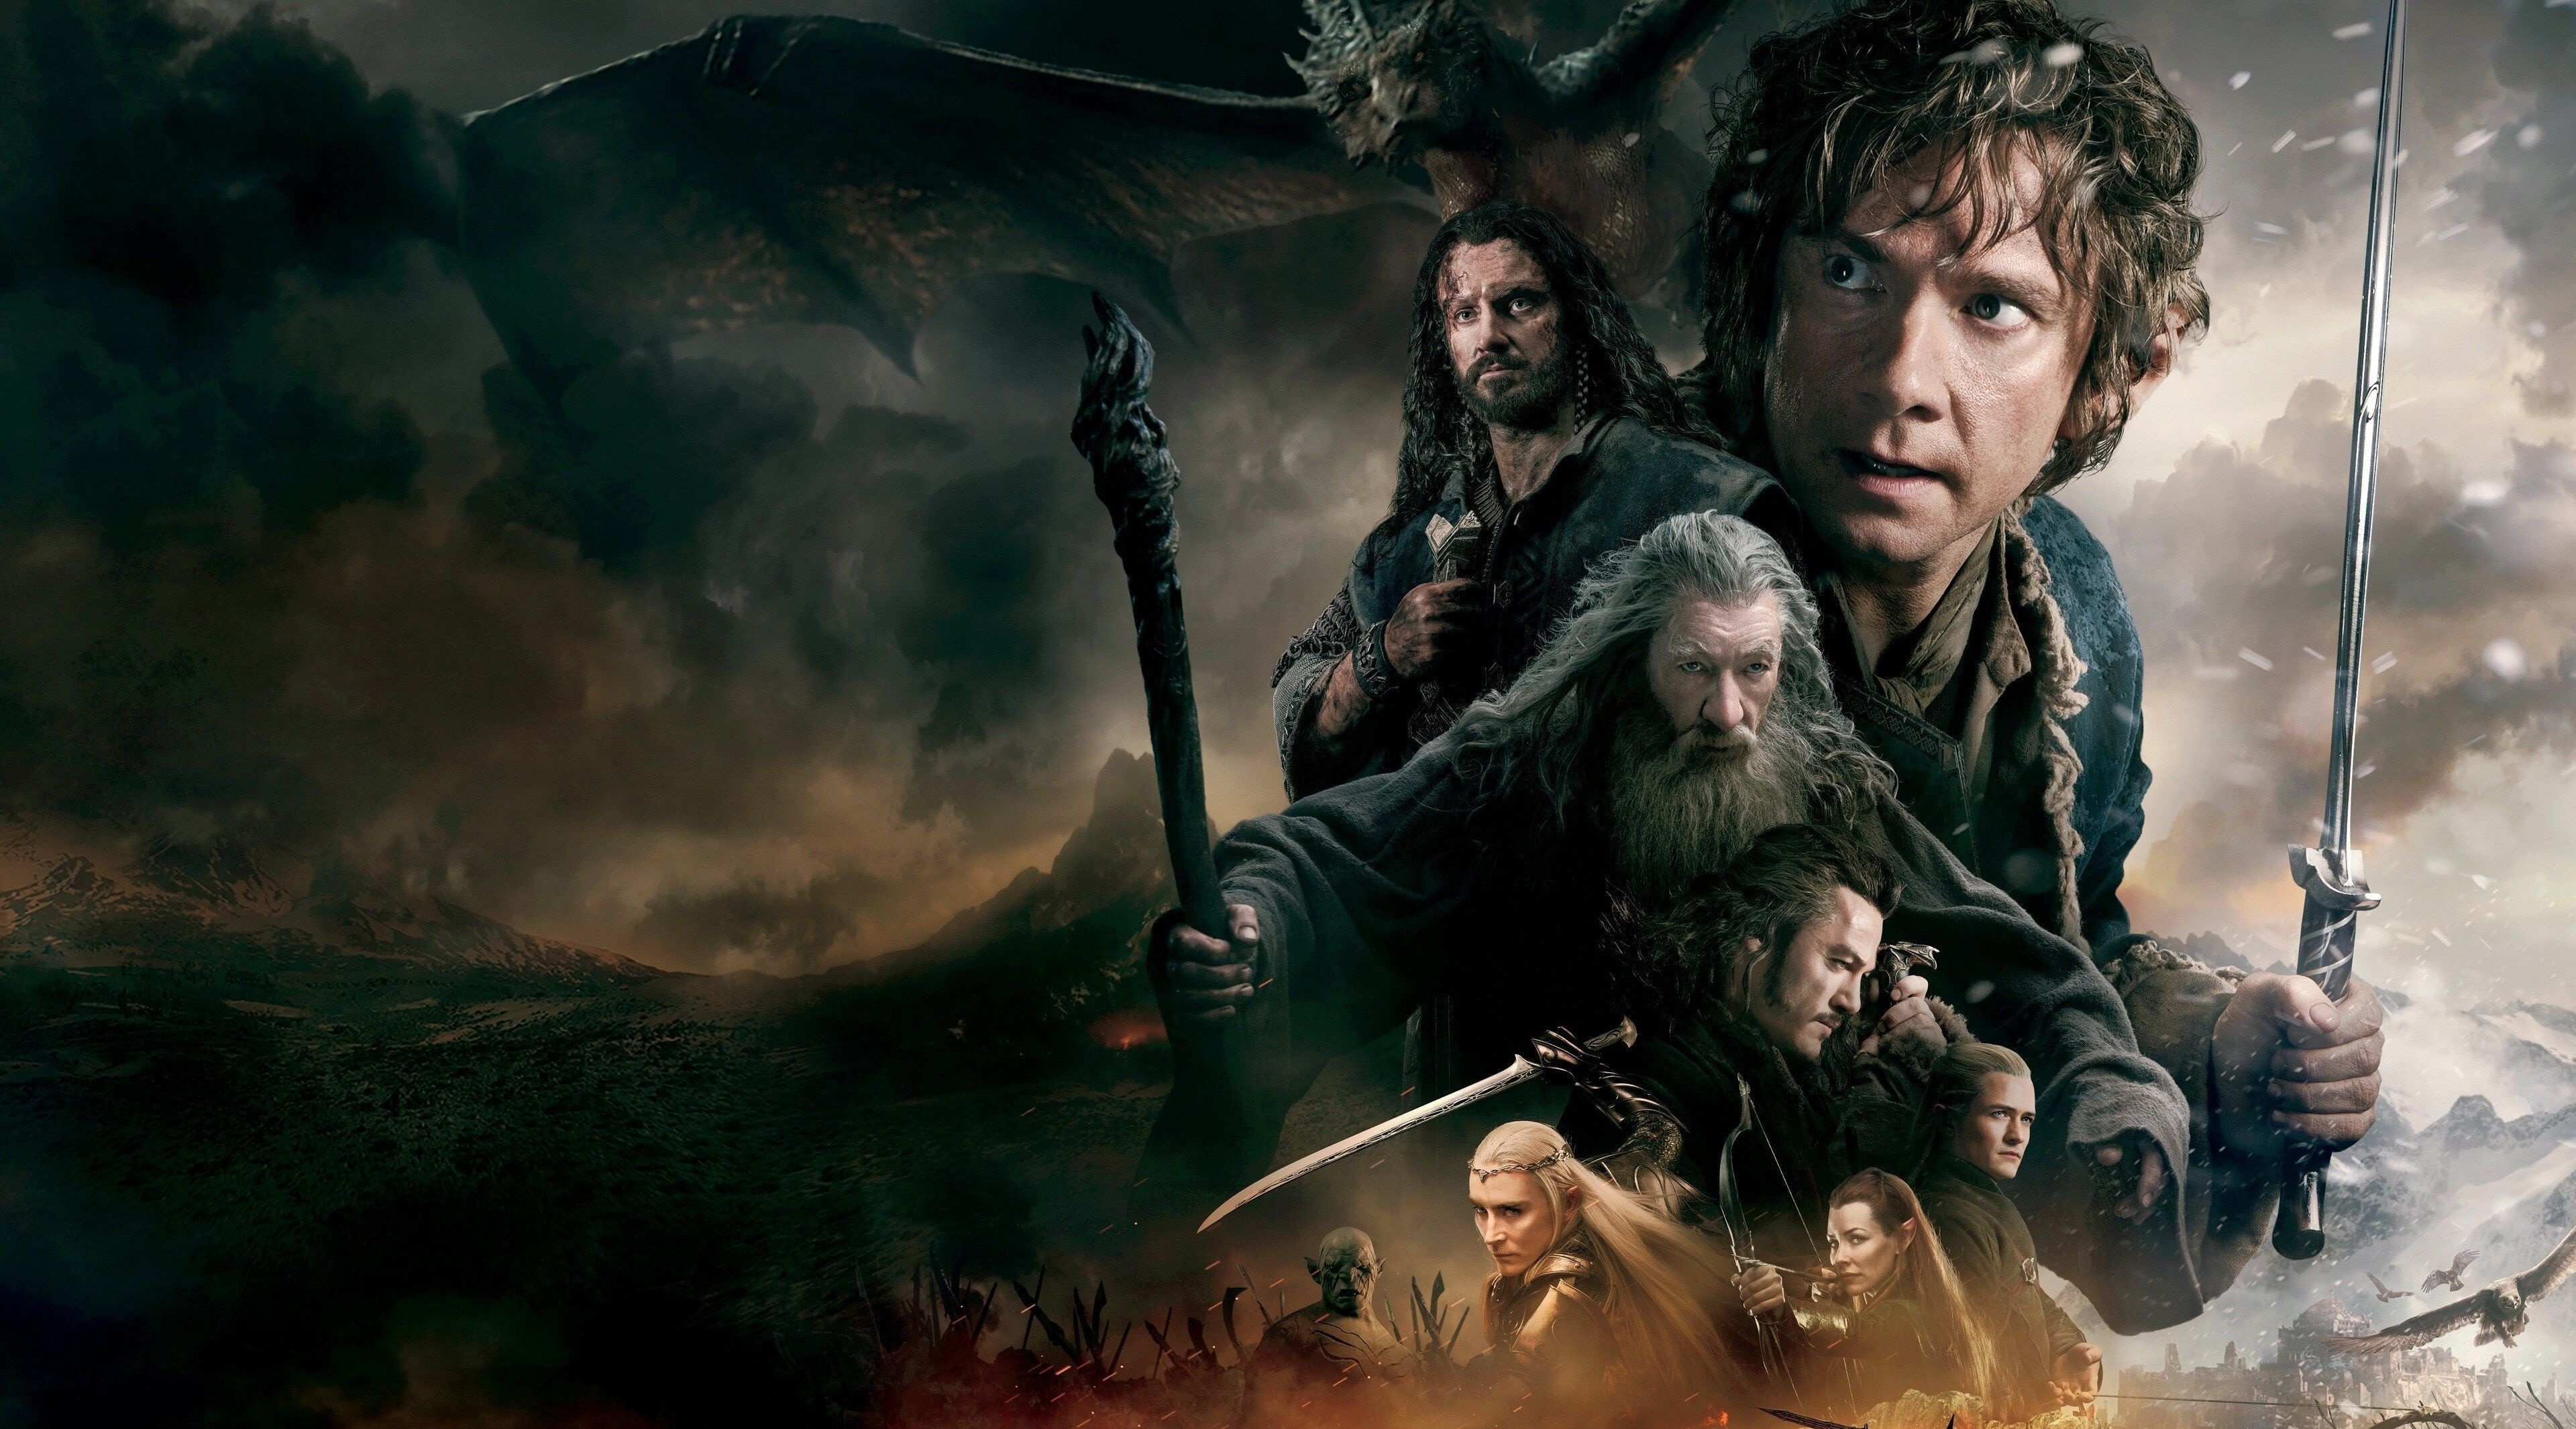 Bard, The Lord of the Rings, Movies, Hobbit wallpapers, 3840x2130 HD Desktop